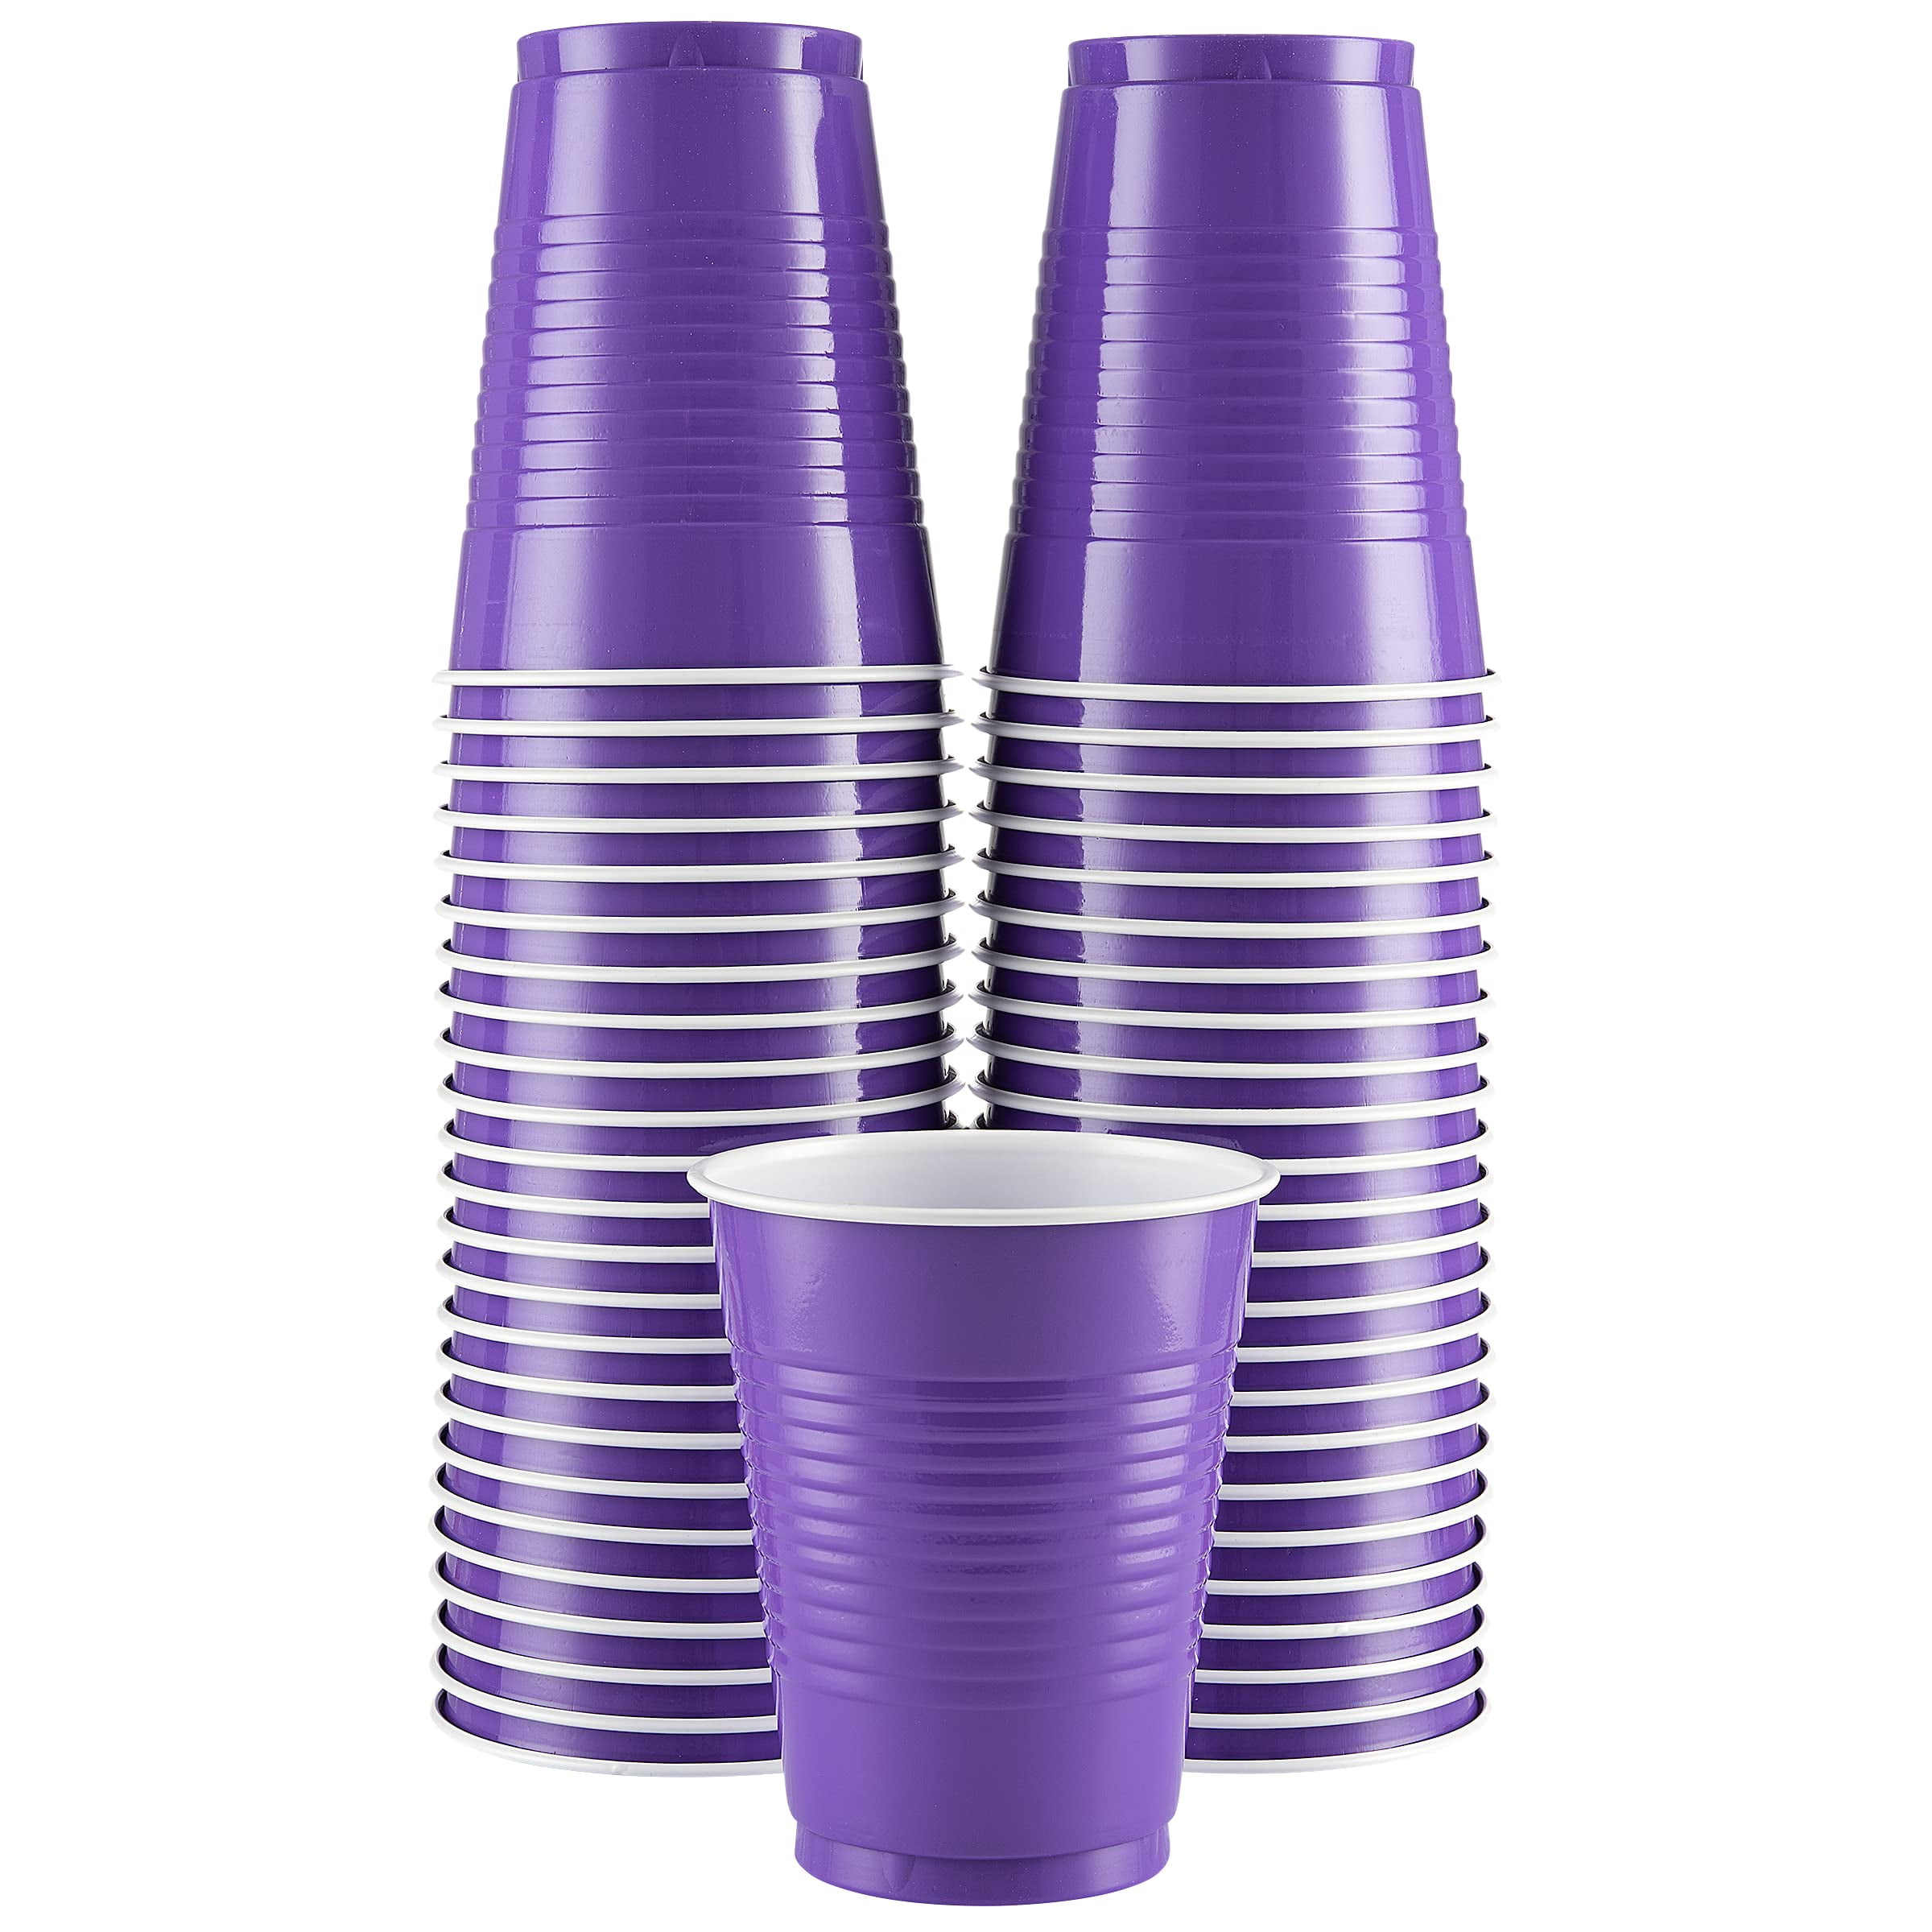 100 Pk 16oz Hard Clear Disposable Plastic Cups Wedding, Party, Celebration (Set of 100) Perfect Settings Tableware Color: Purple